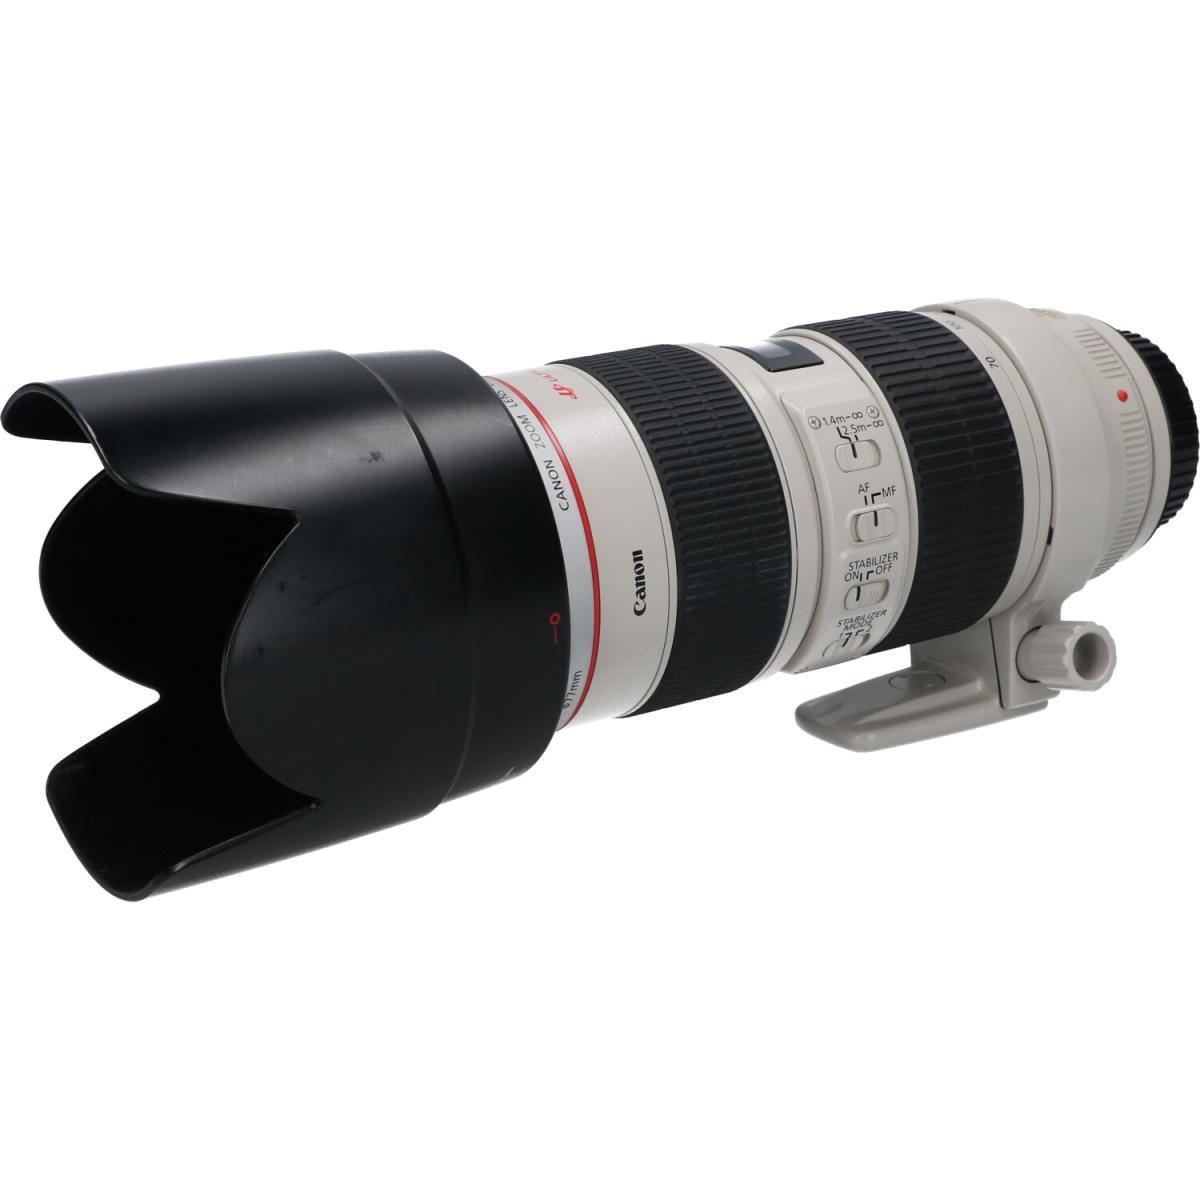 CANON EF70-200mm F2.8L IS USM